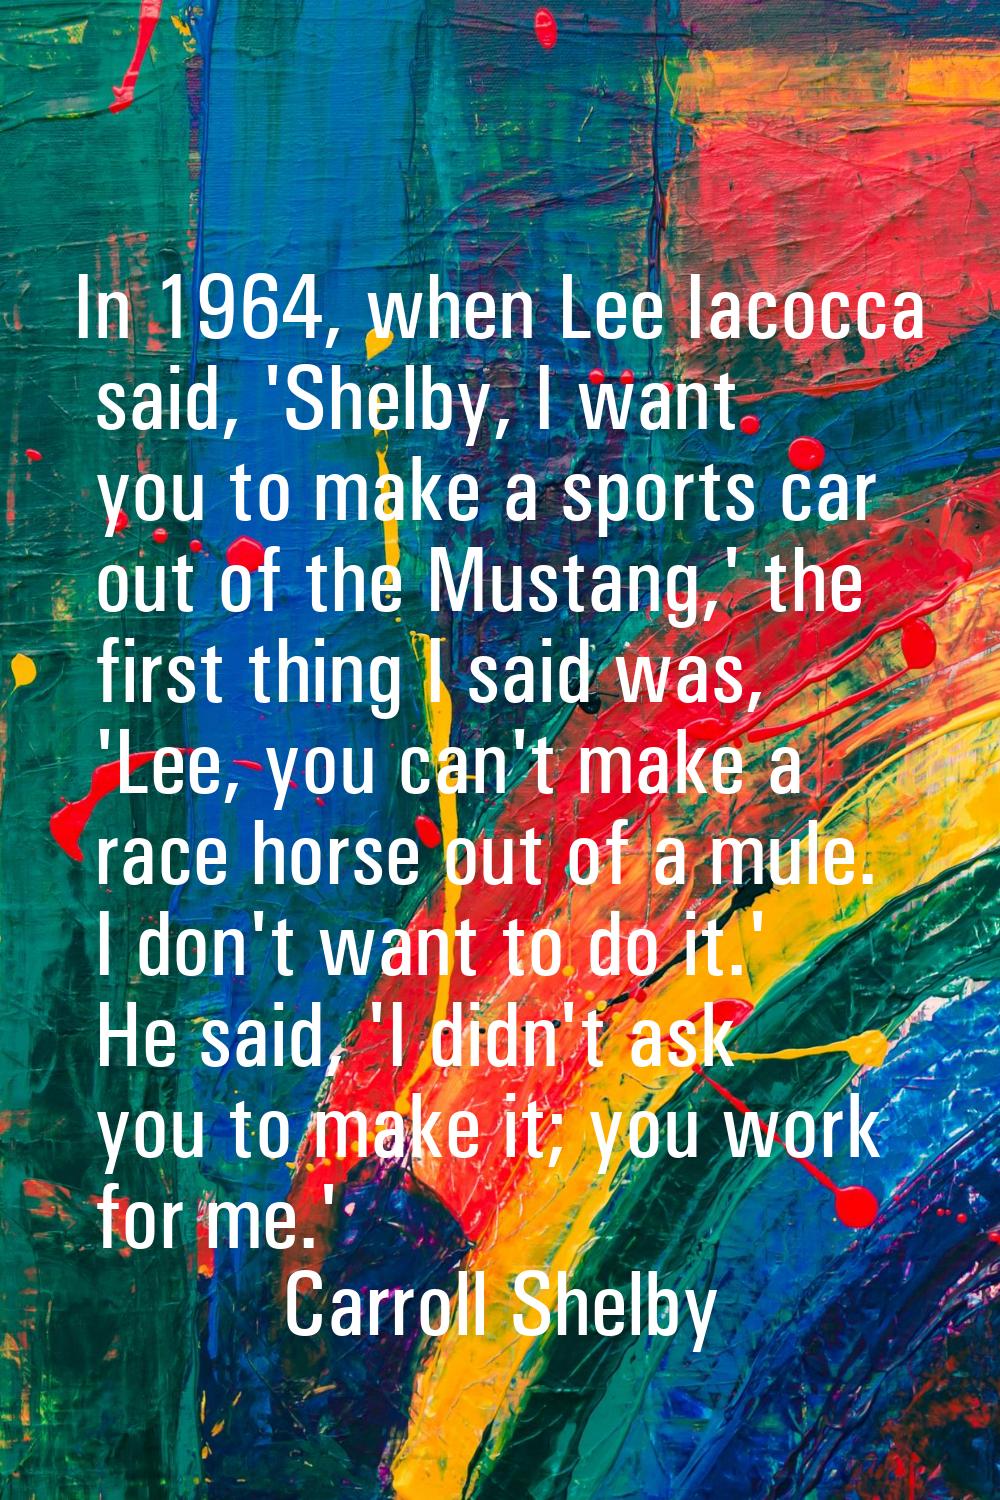 In 1964, when Lee Iacocca said, 'Shelby, I want you to make a sports car out of the Mustang,' the f